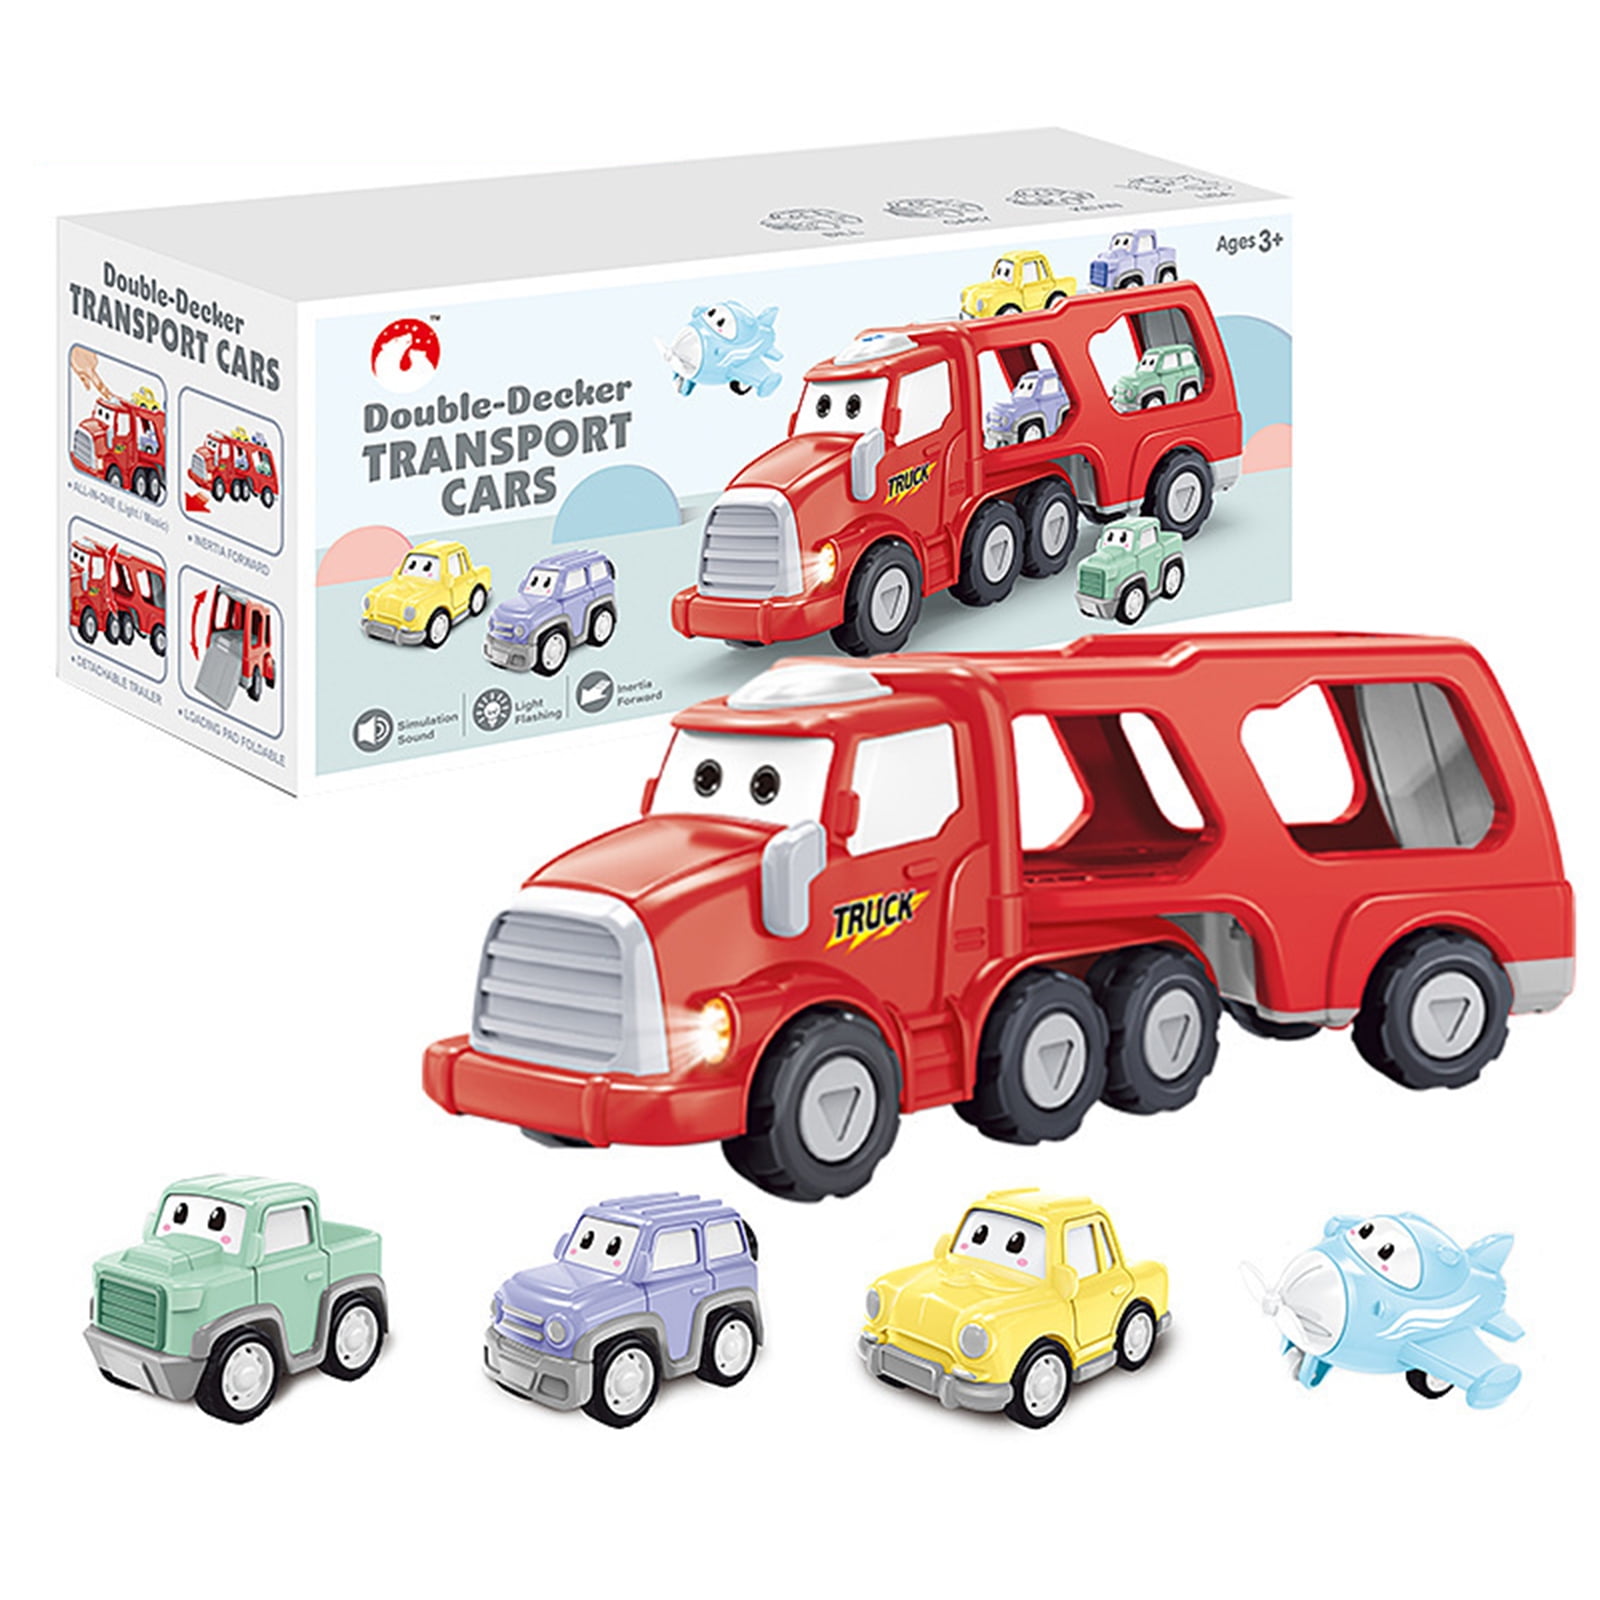 huntermoon Fire Truck Toy for Boy 3-6 Year Old, Vehicle Toy Set with Lights  and Sounds, Large Transport Cargo Truck, Small Helicopter, Airplane,  Emergency Rescue Car, 5 in 1 Toy Set,Birthday Gift -